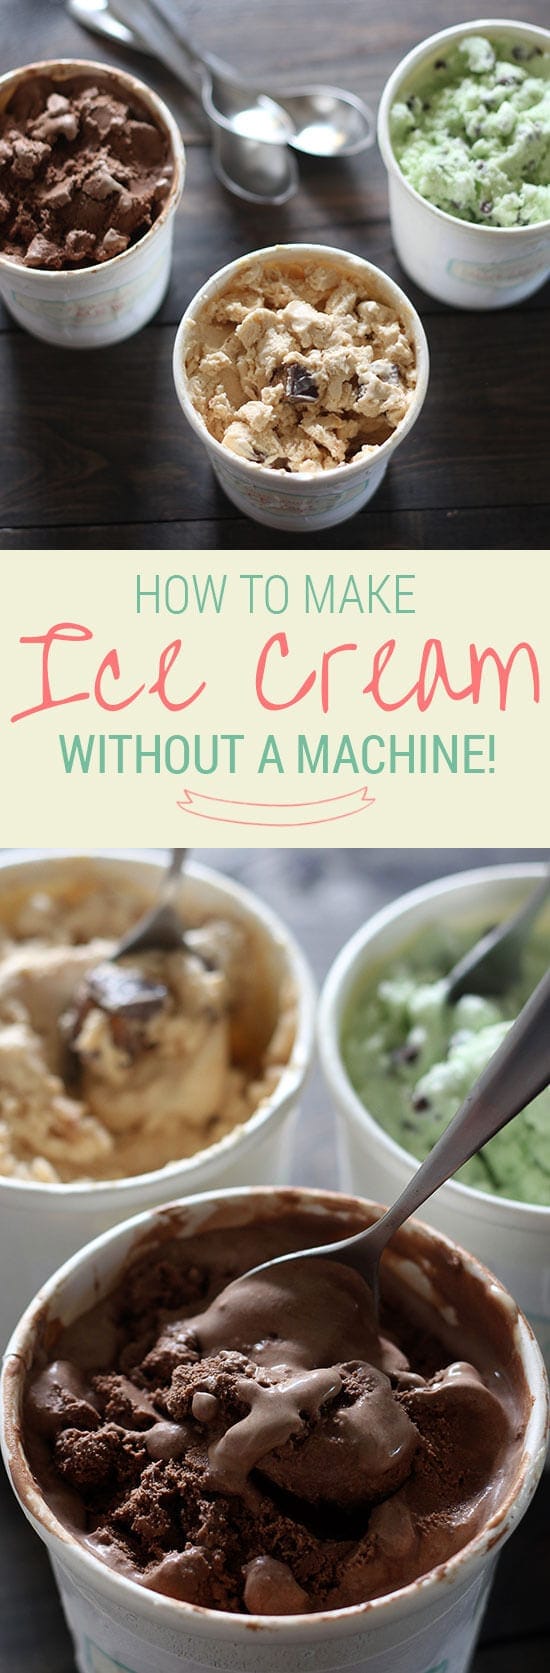 How to make the best ice cream without a machine! 3 methods, step-by-step video, and free printable ice cream labels!